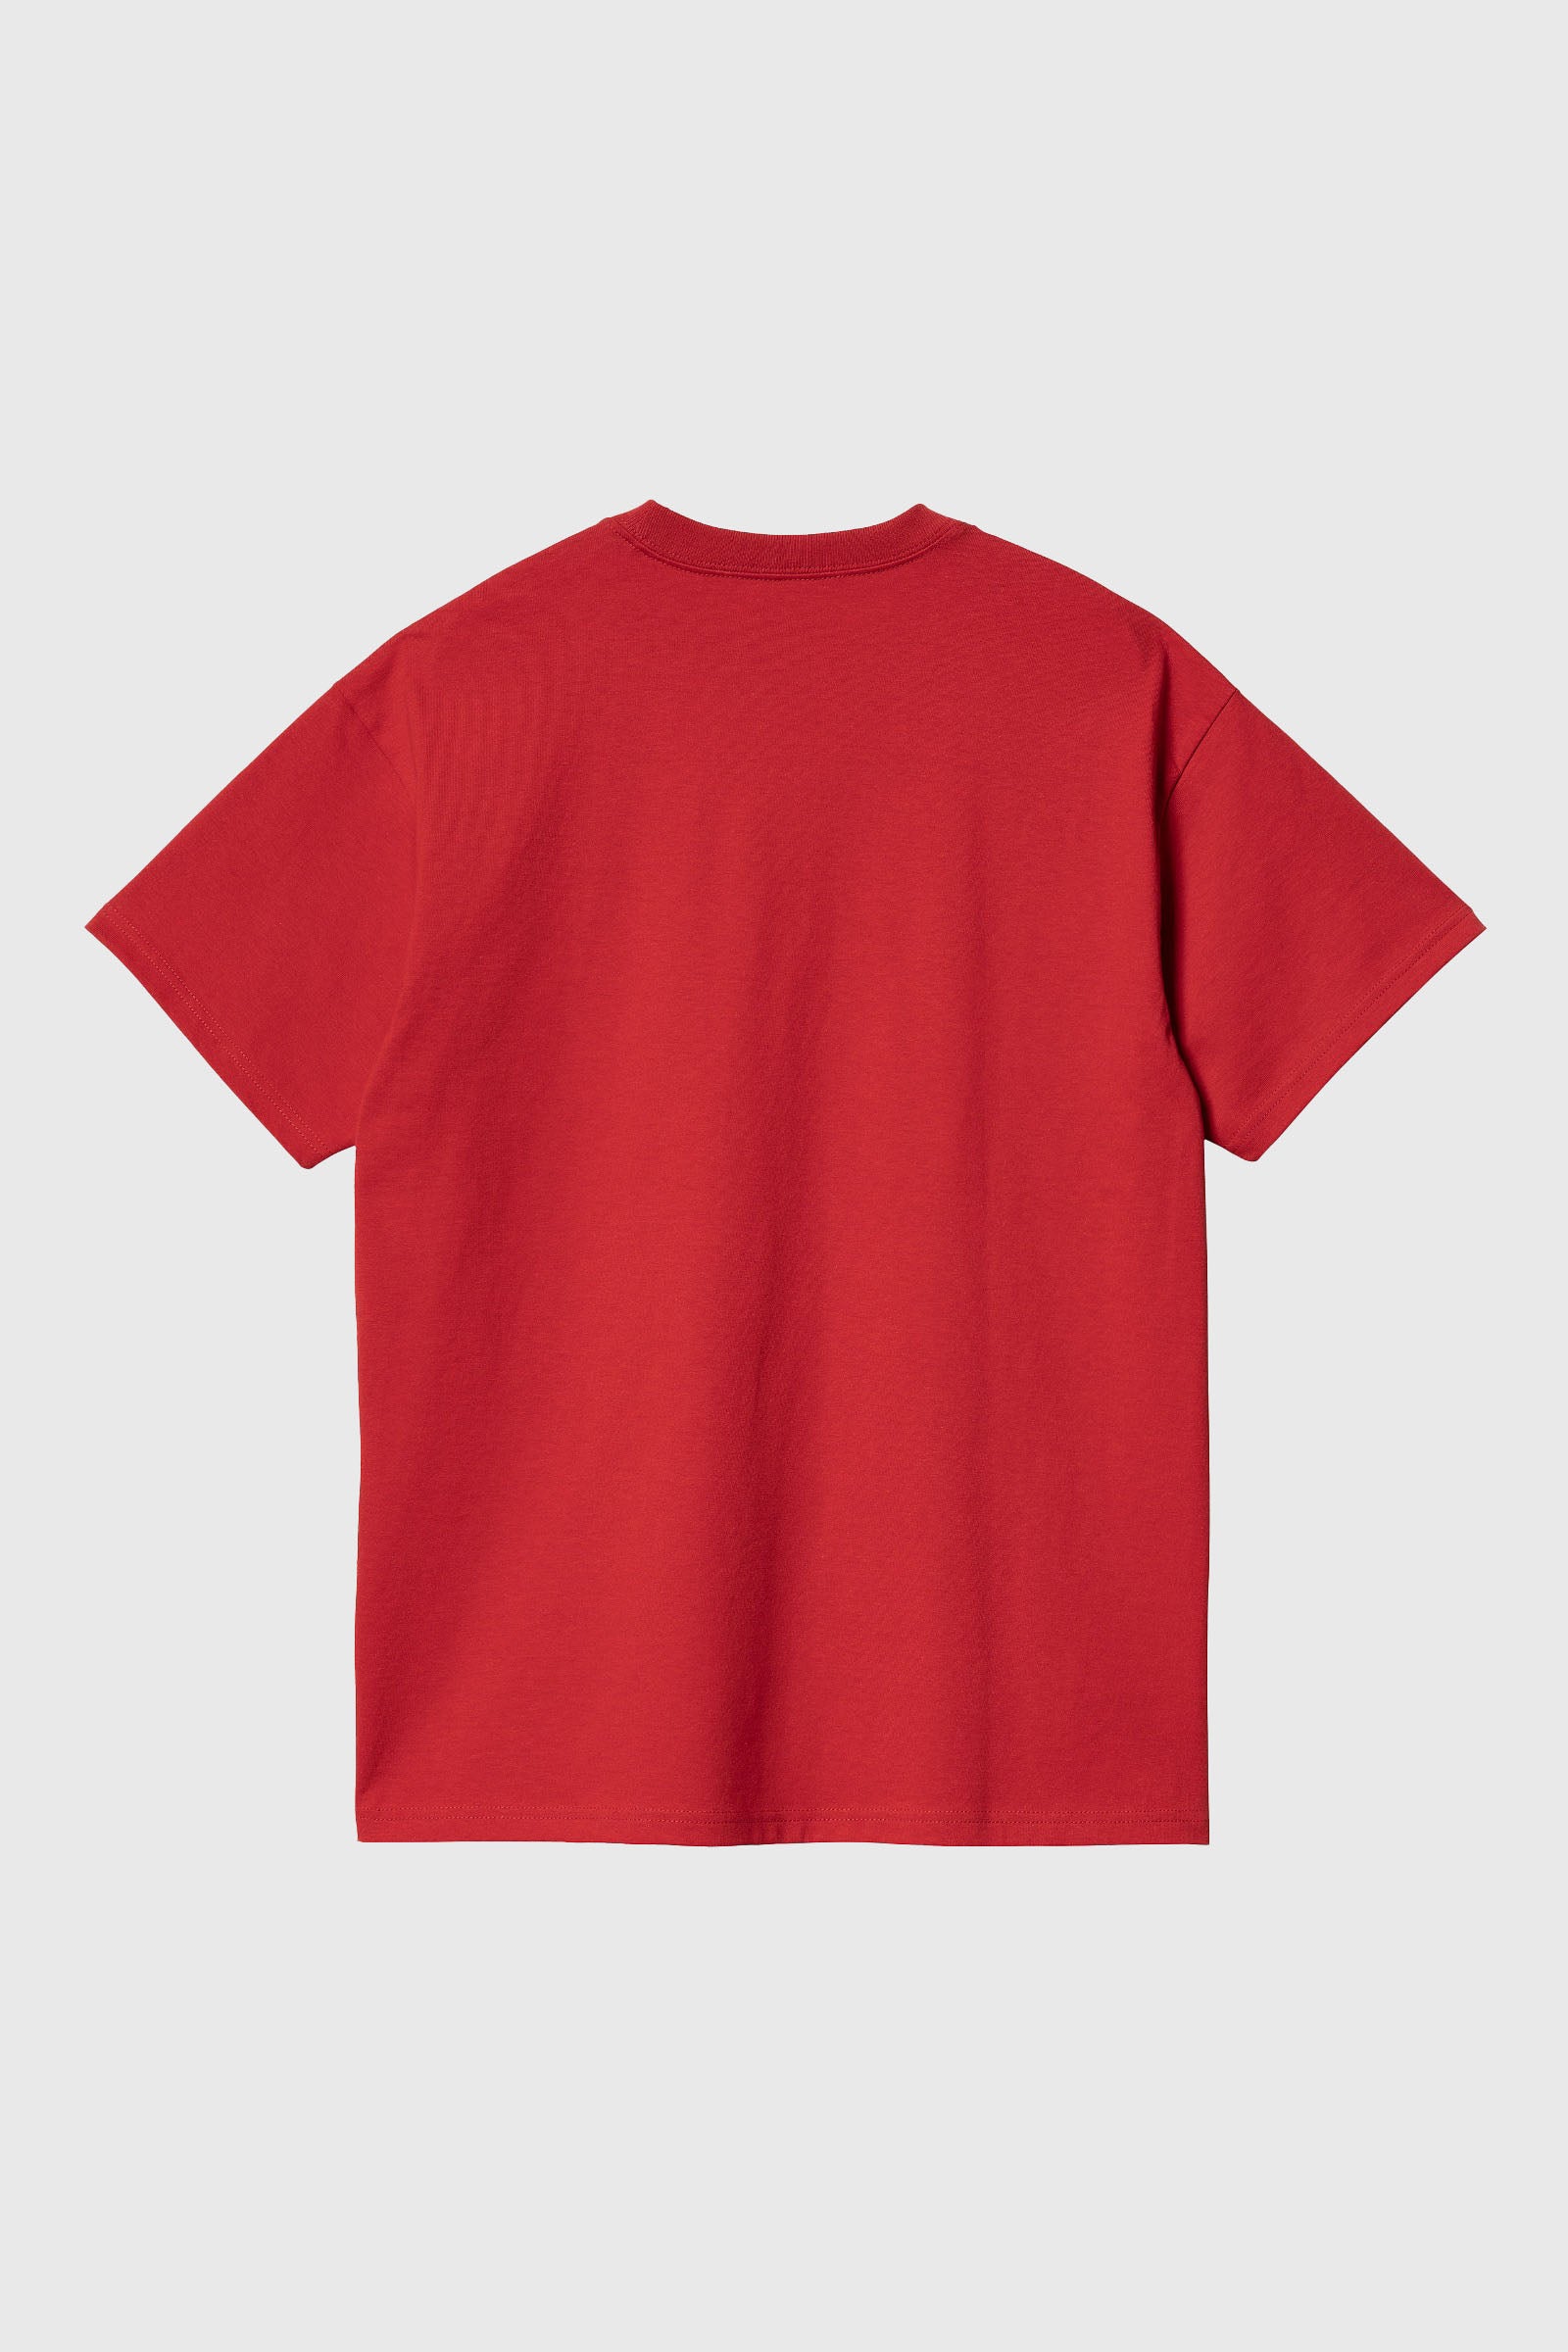 Carhartt WIP T-Shirt S/S Smart Sports Cotone Rosso - 4